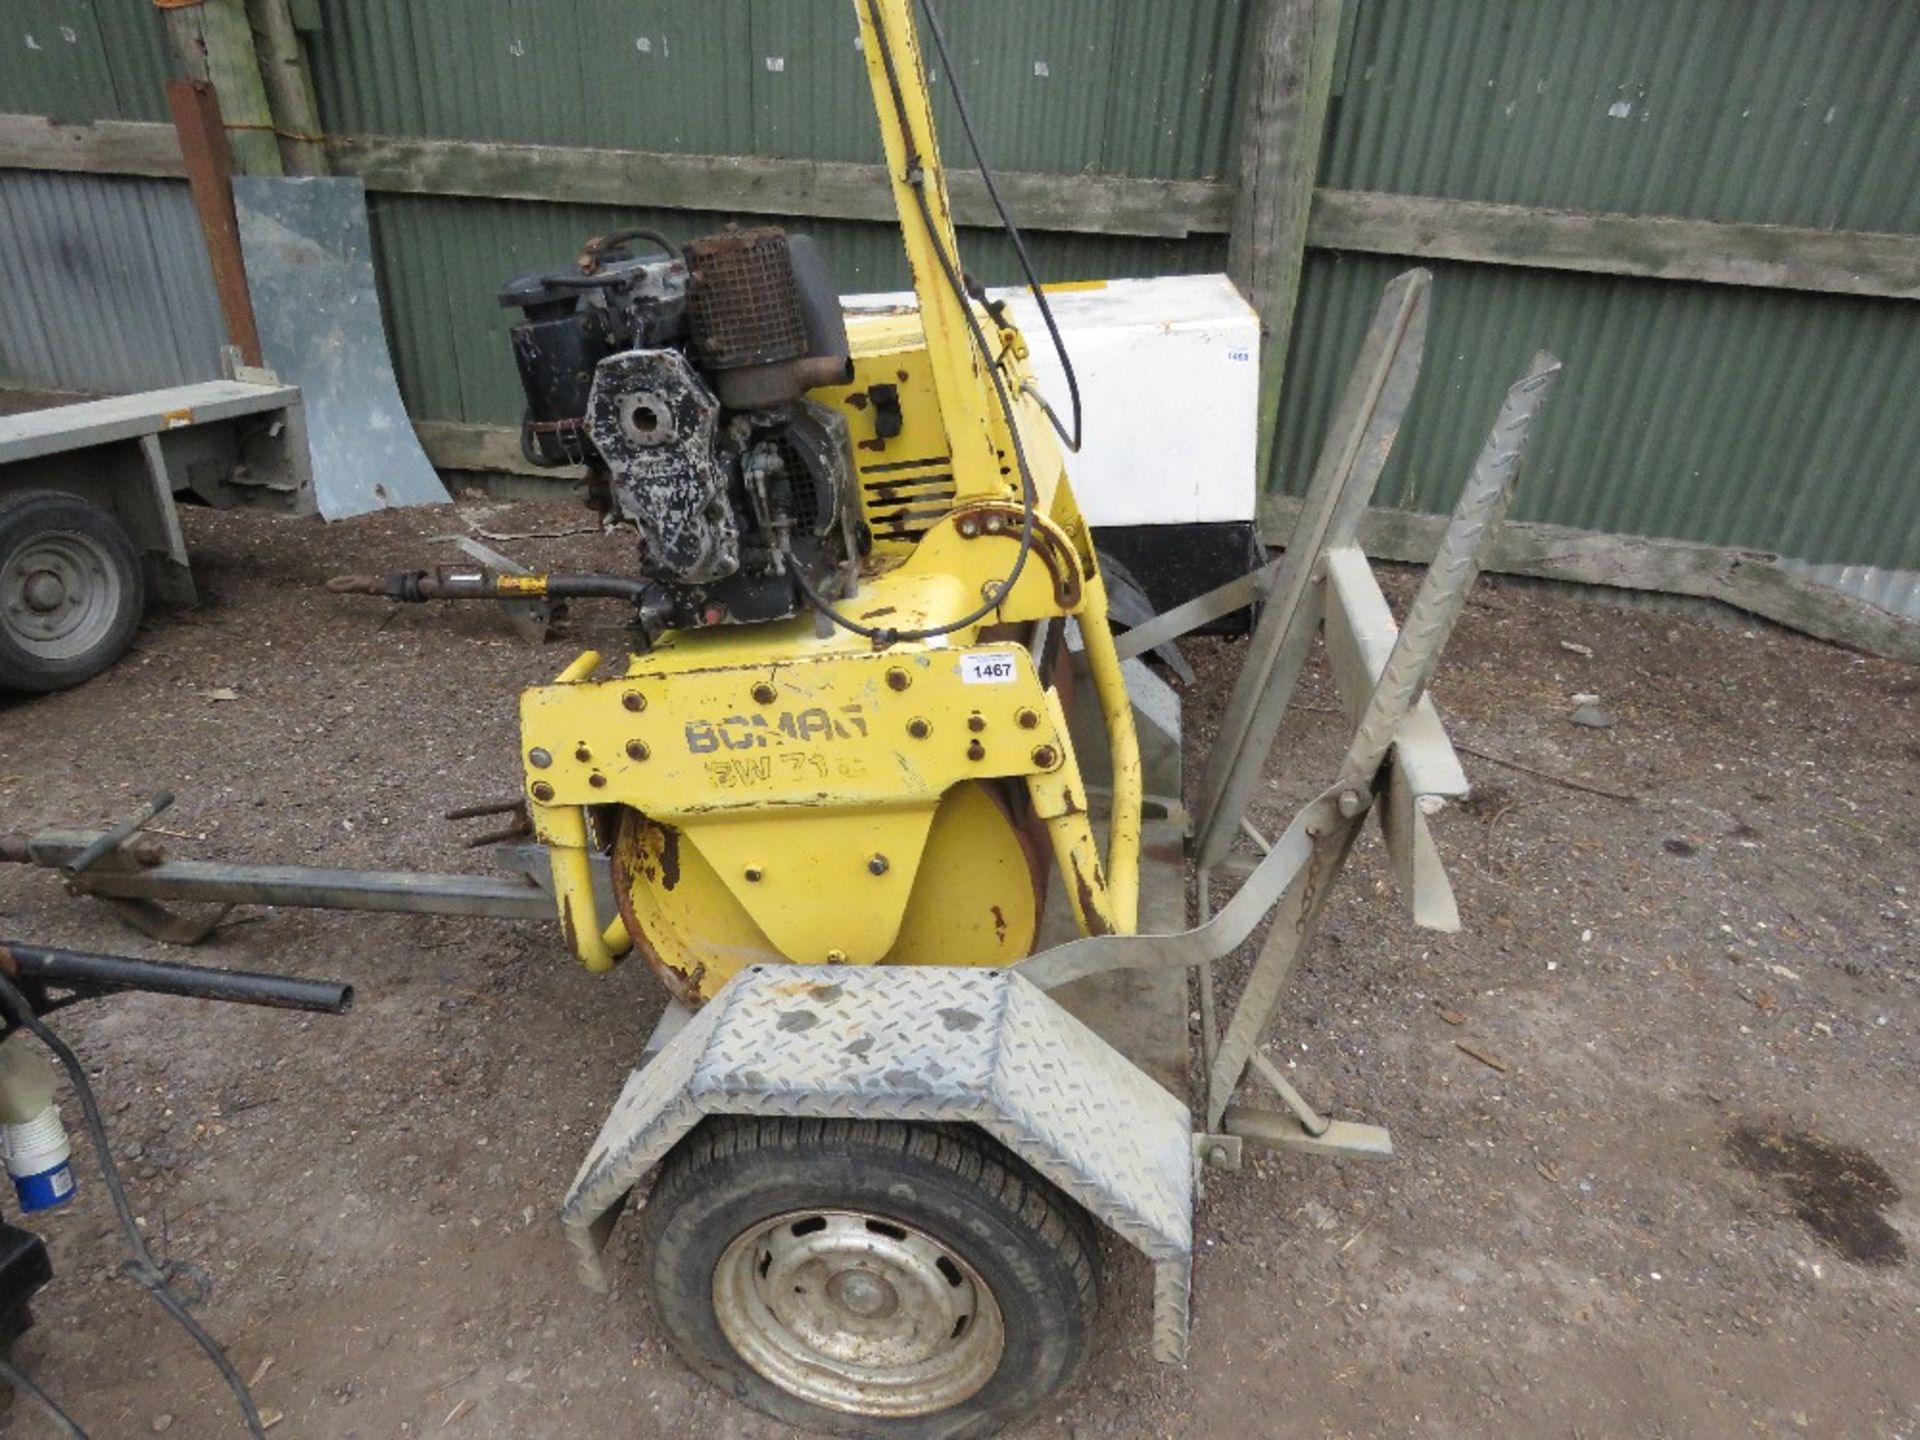 BOMAG HANDLE START ROLLER ON A TRAILER..NO HANDLE THEREFORE UNTESTED.